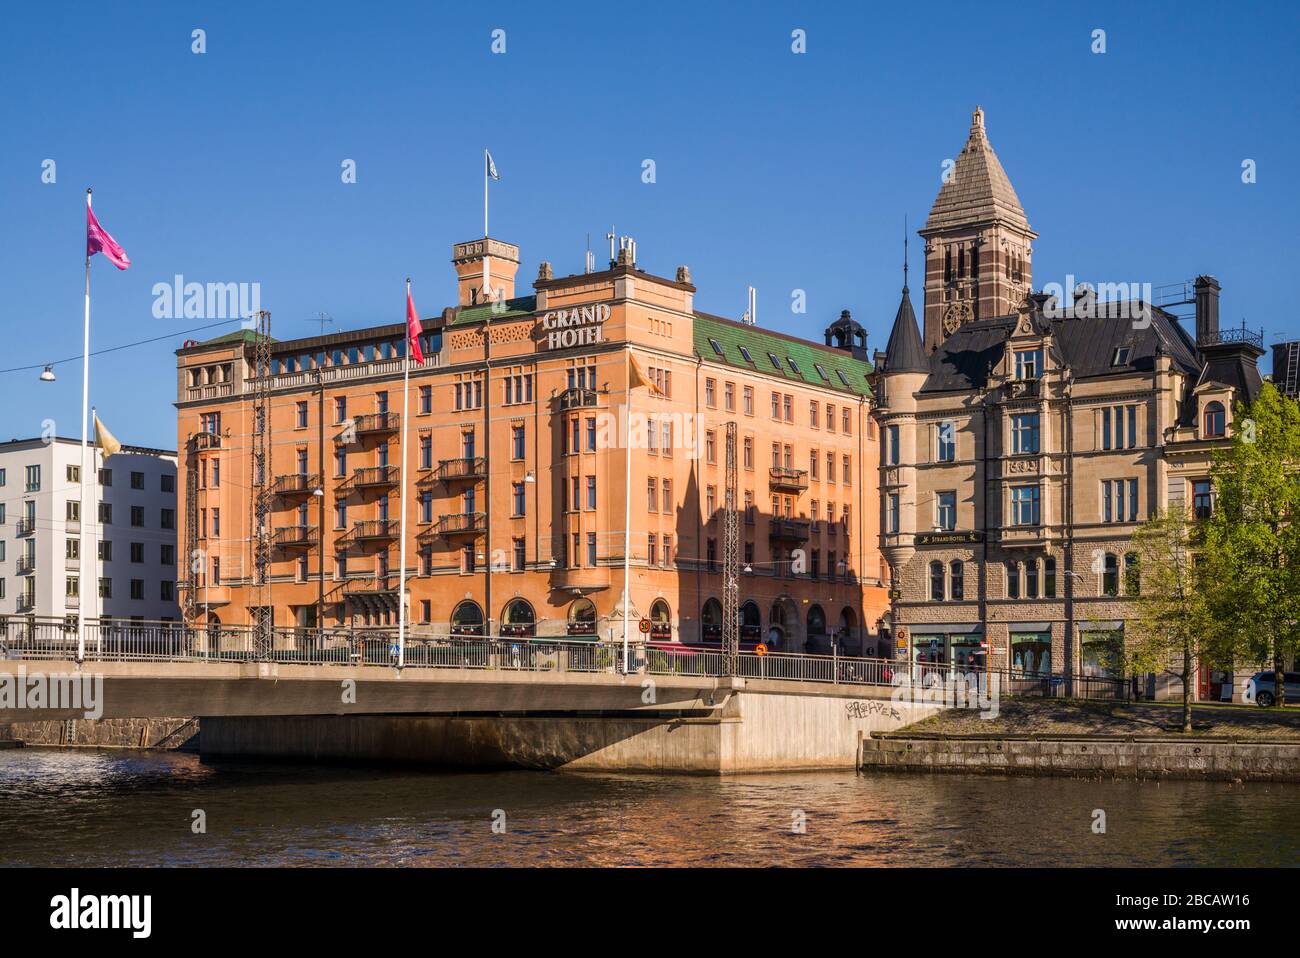 Sweden, Southeast Sweden, Norrkoping, early Swedish industrial town, Grand Hotell Stock Photo